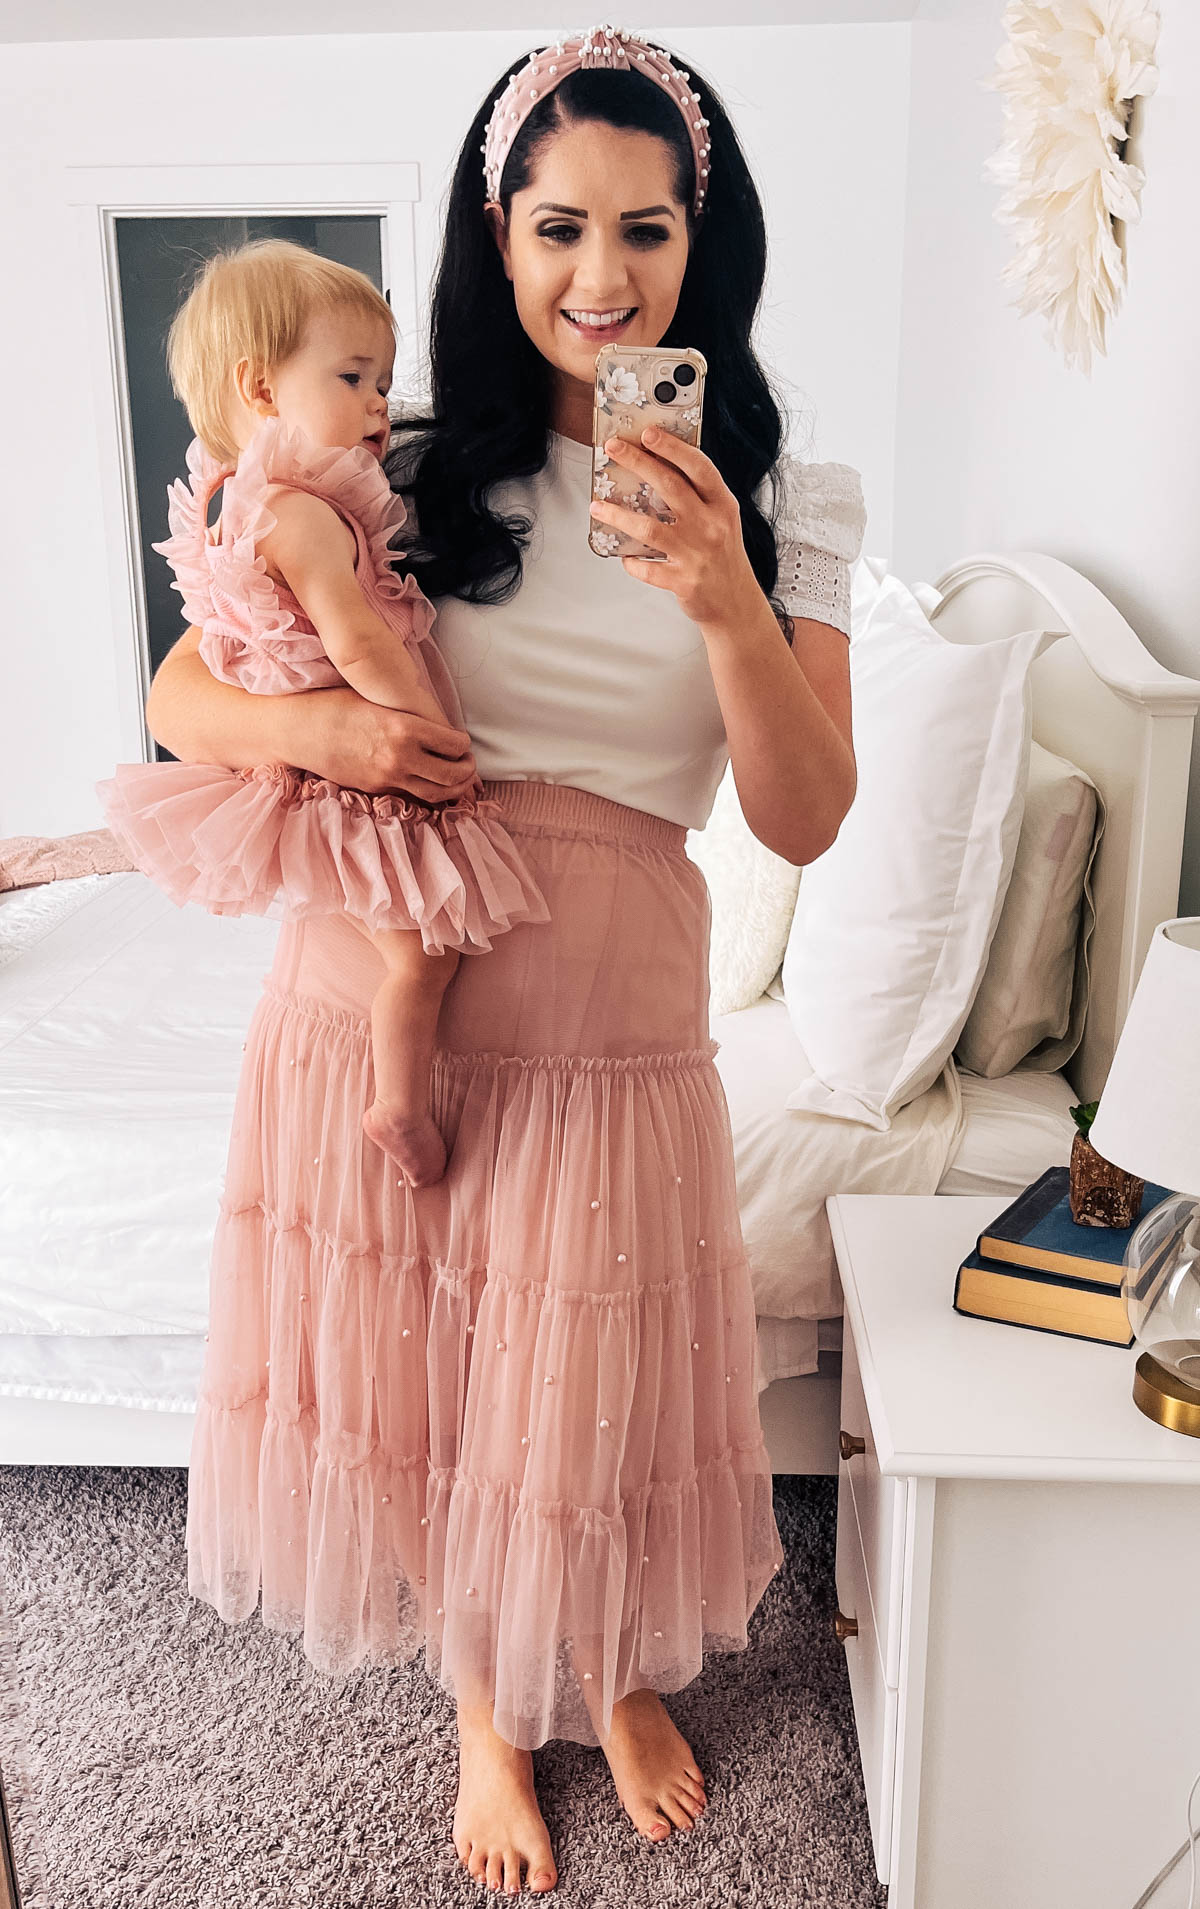 Mom wearing pink tulle skirt takes mirror picture with baby girl wearing pink dress.